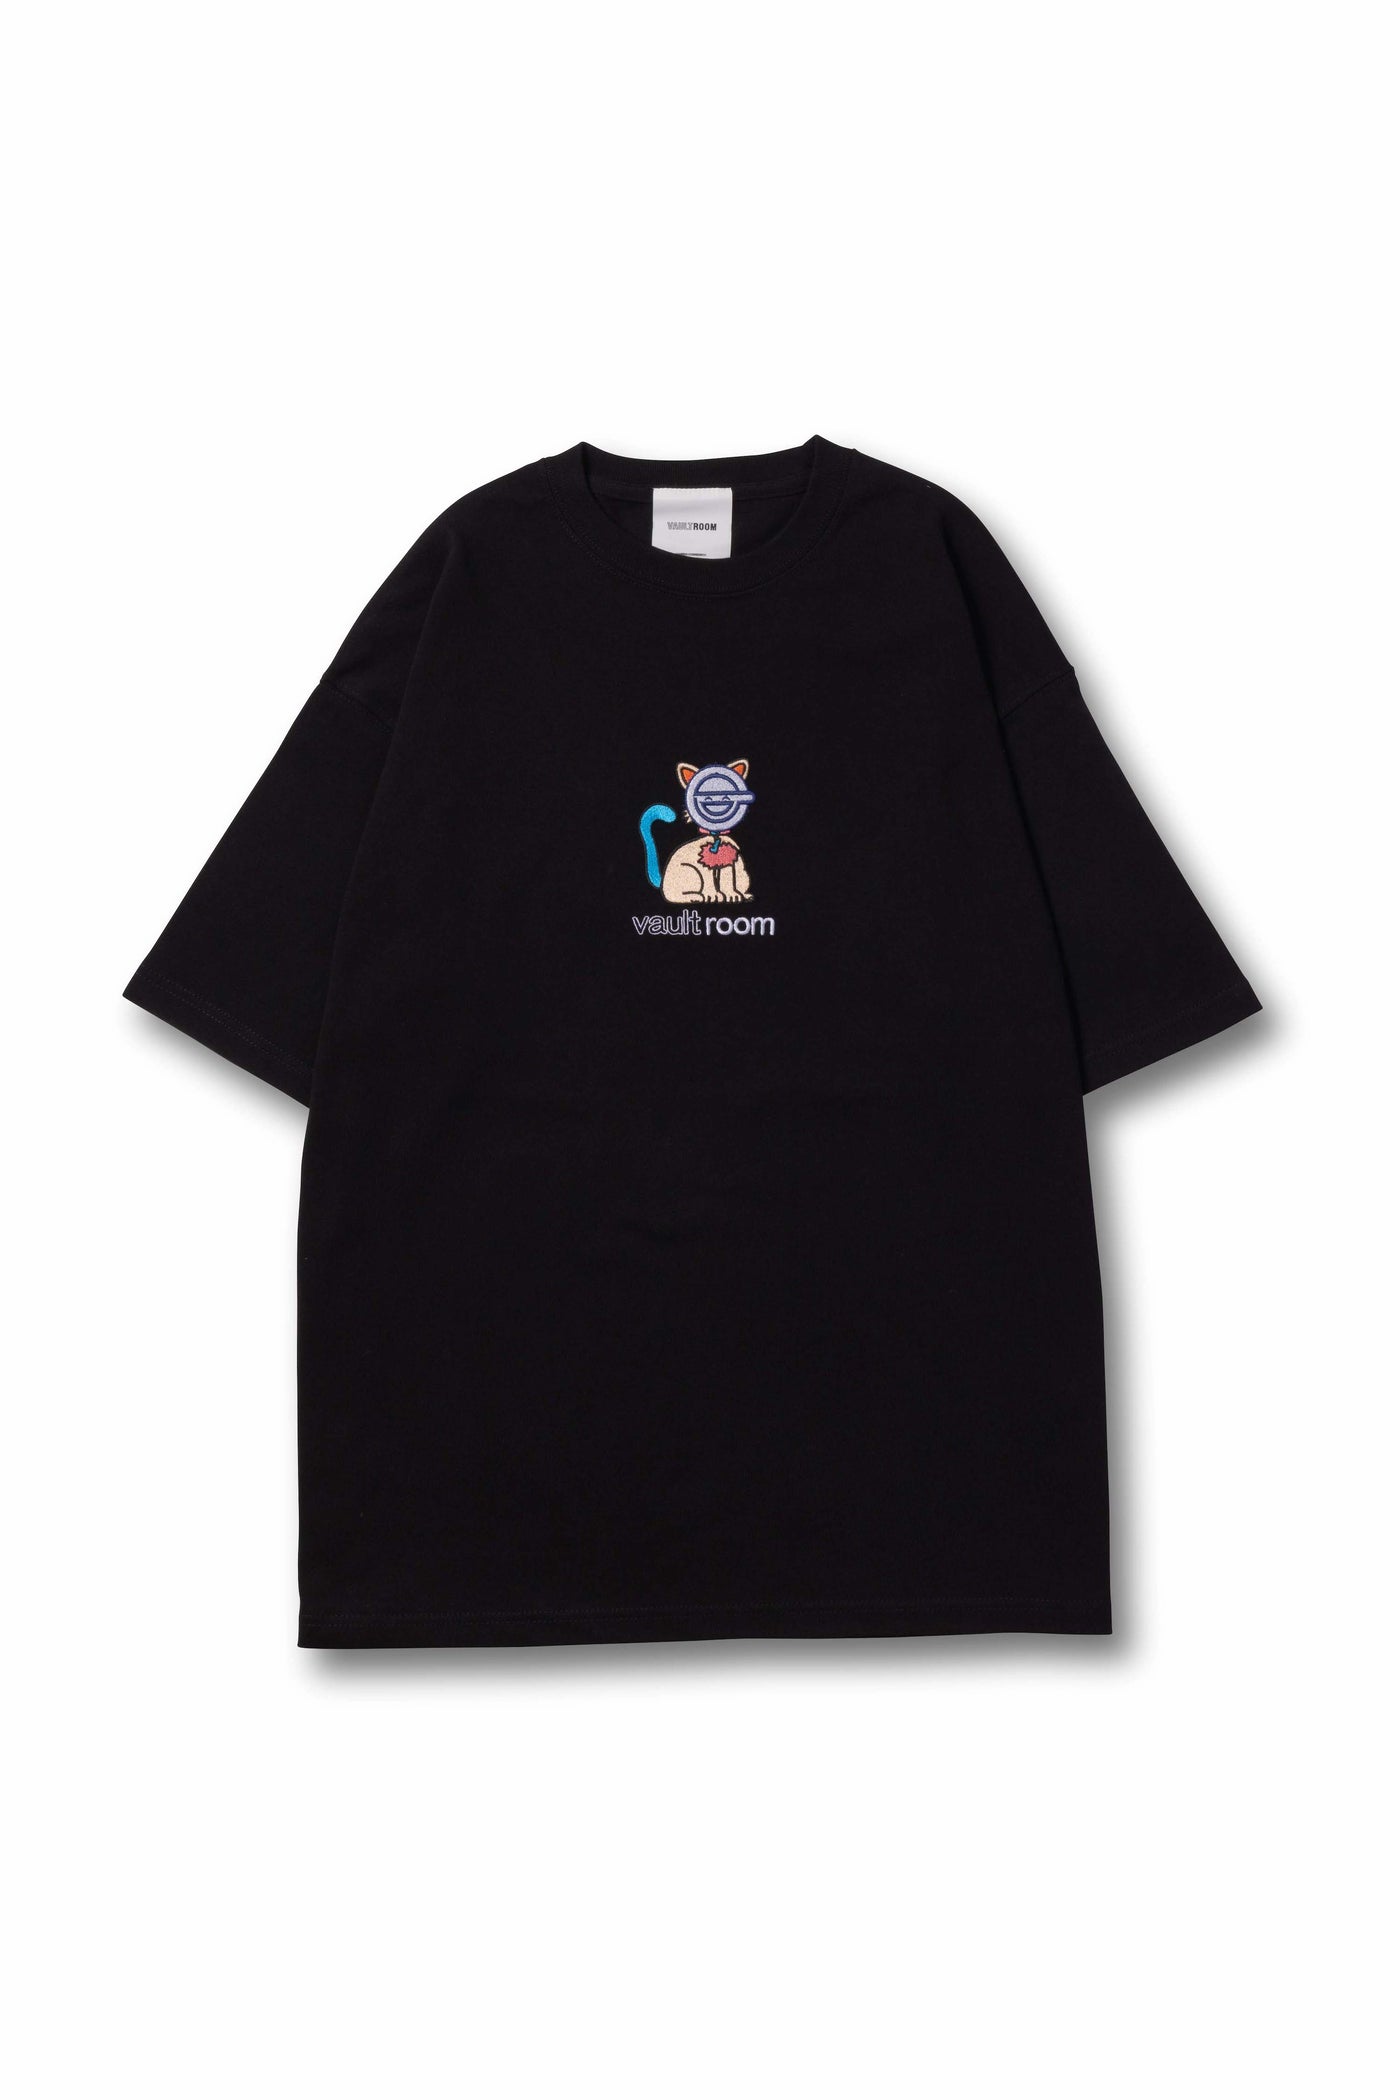 KEYCAT THE LAUGHING MAN TEE / BLK